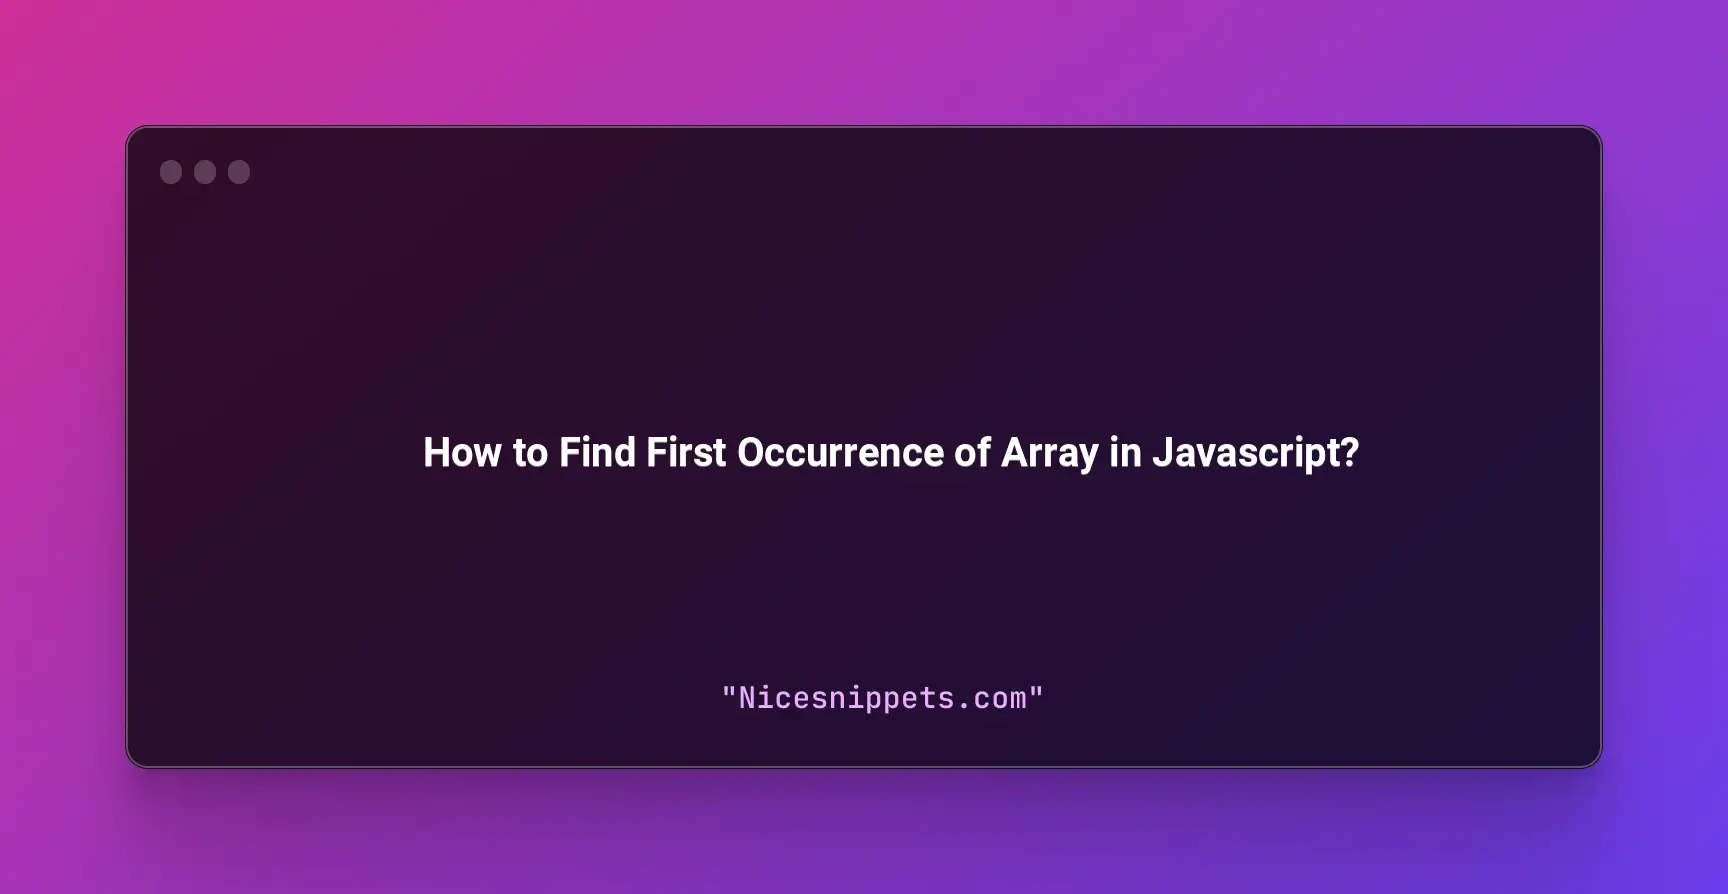 How to Find First Occurrence of Array in Javascript?